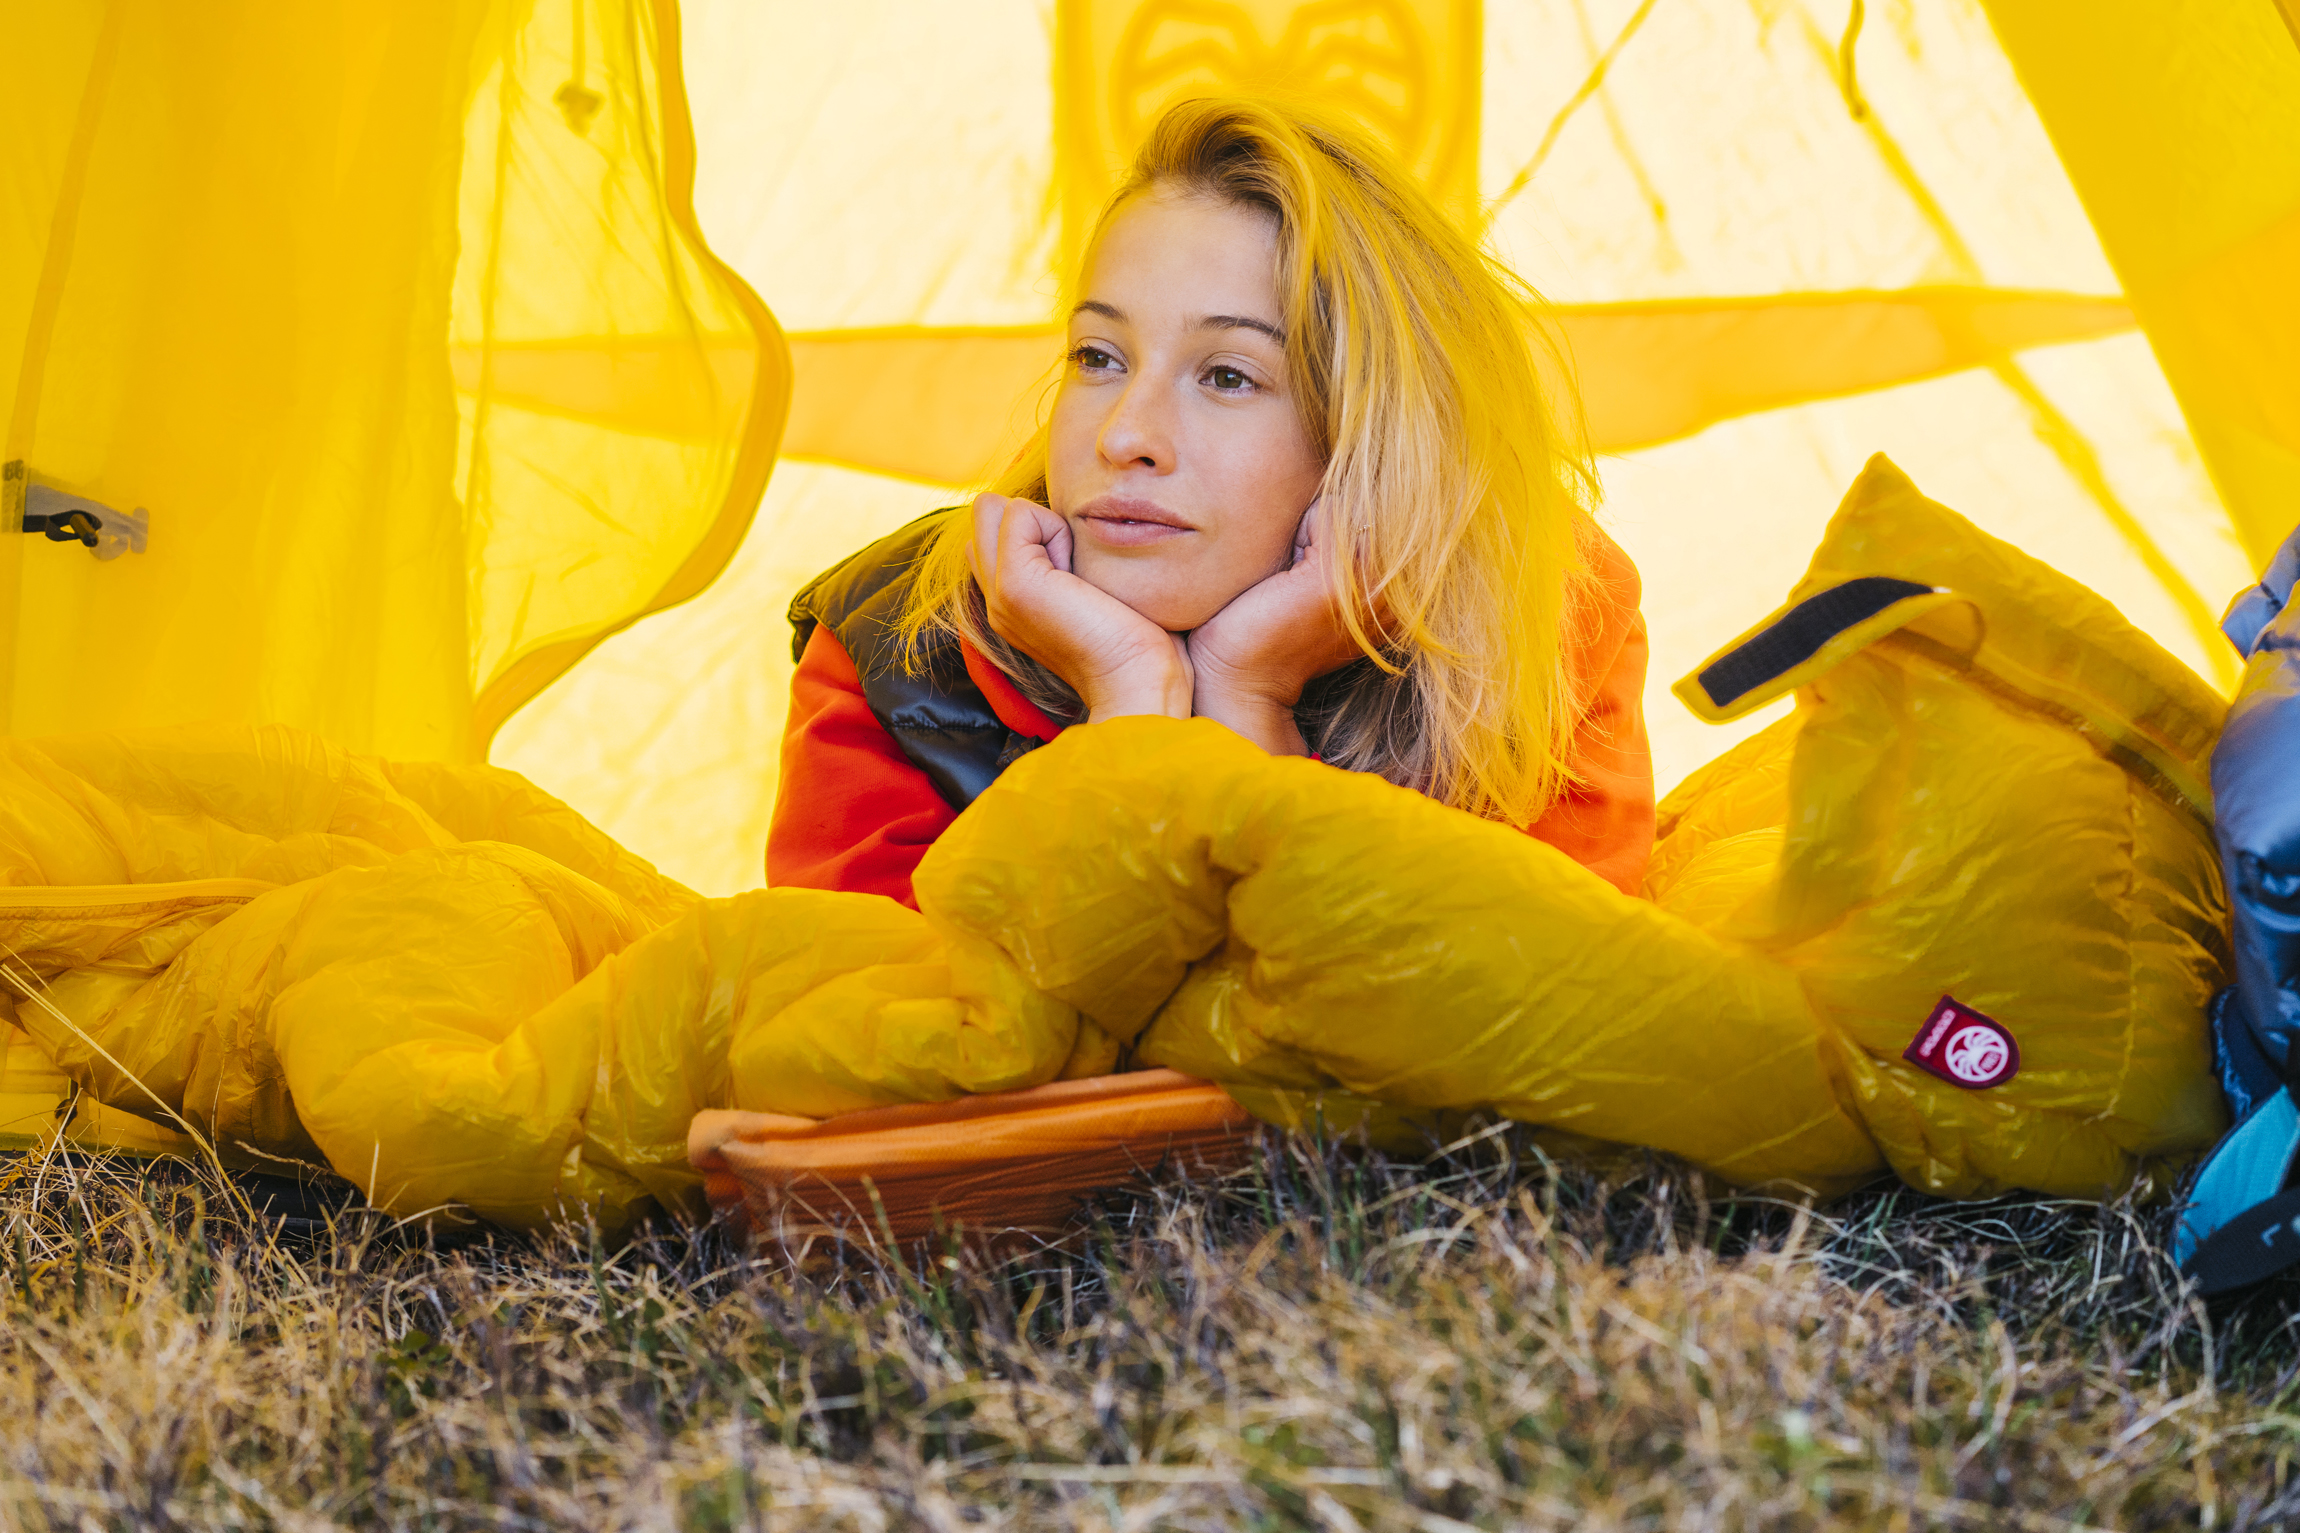  SLEEPING BAG FOR A FESTIVAL - WHICH ONE WILL BE THE BEST?